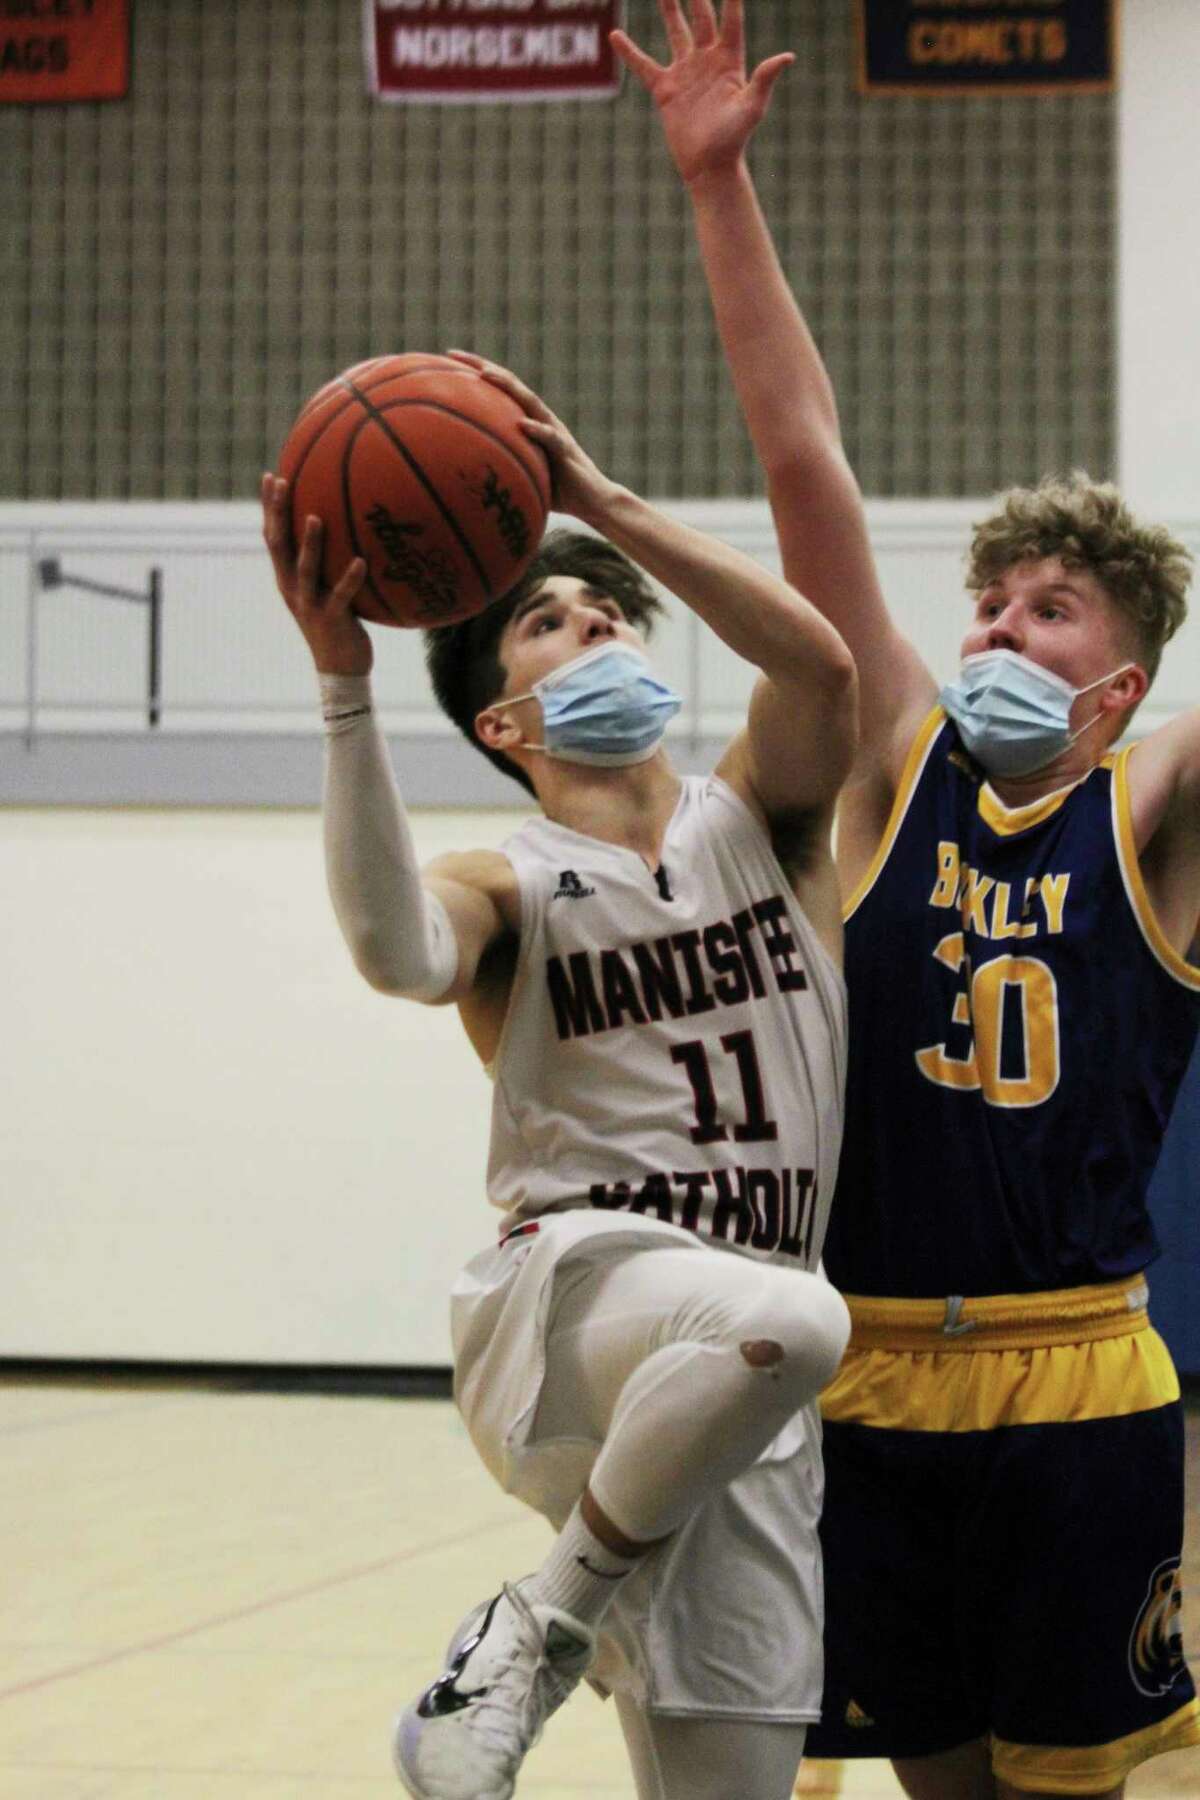 Manistee Catholic Central senior Mateo Barnett was named an All-State honorable mention in Division 4 boys basketball. (News Advocate file photo)